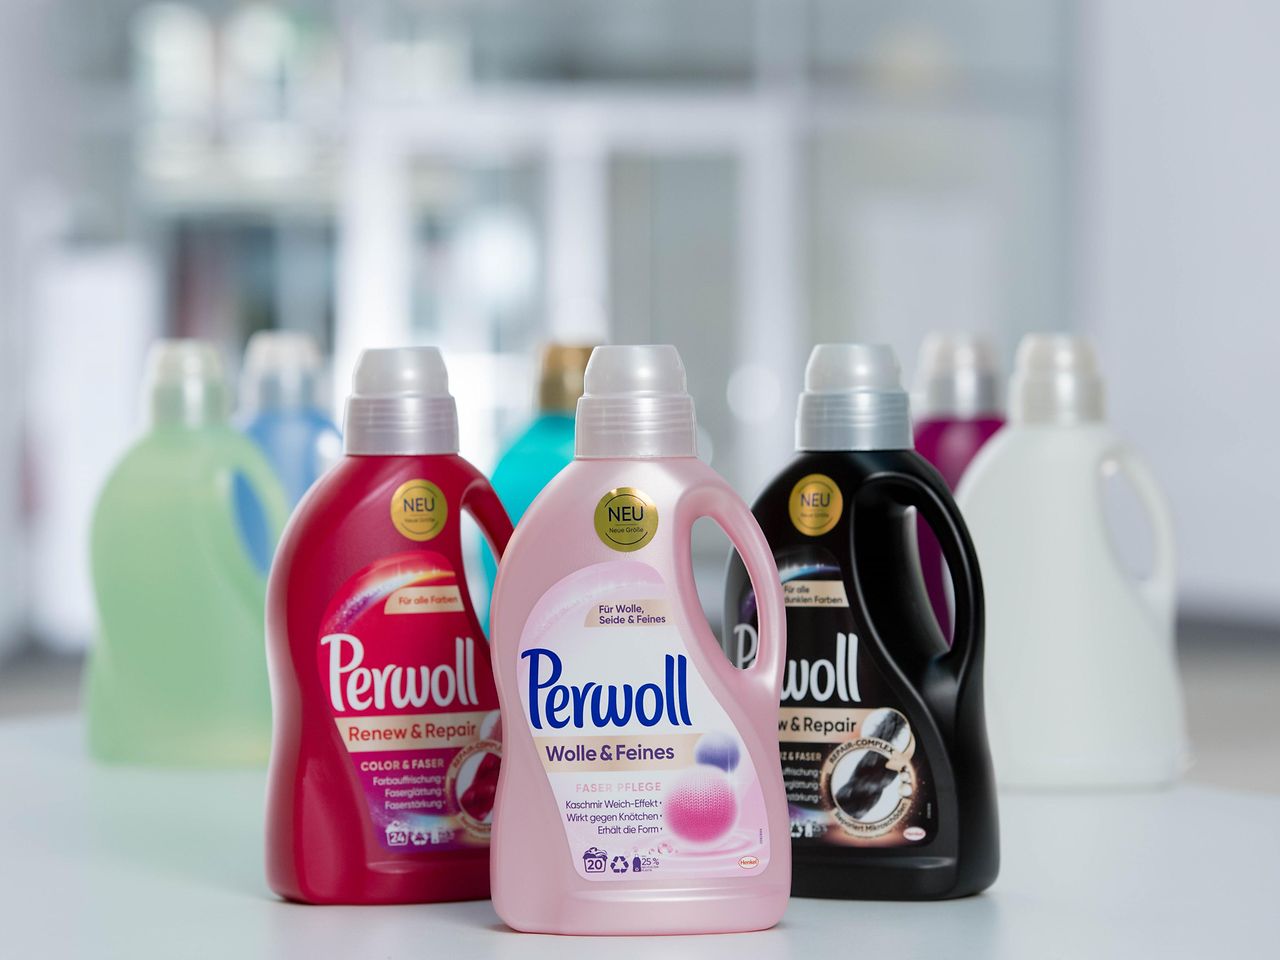 All Perwoll bottles in Western Europe now contain 25 percent recycled plastic.